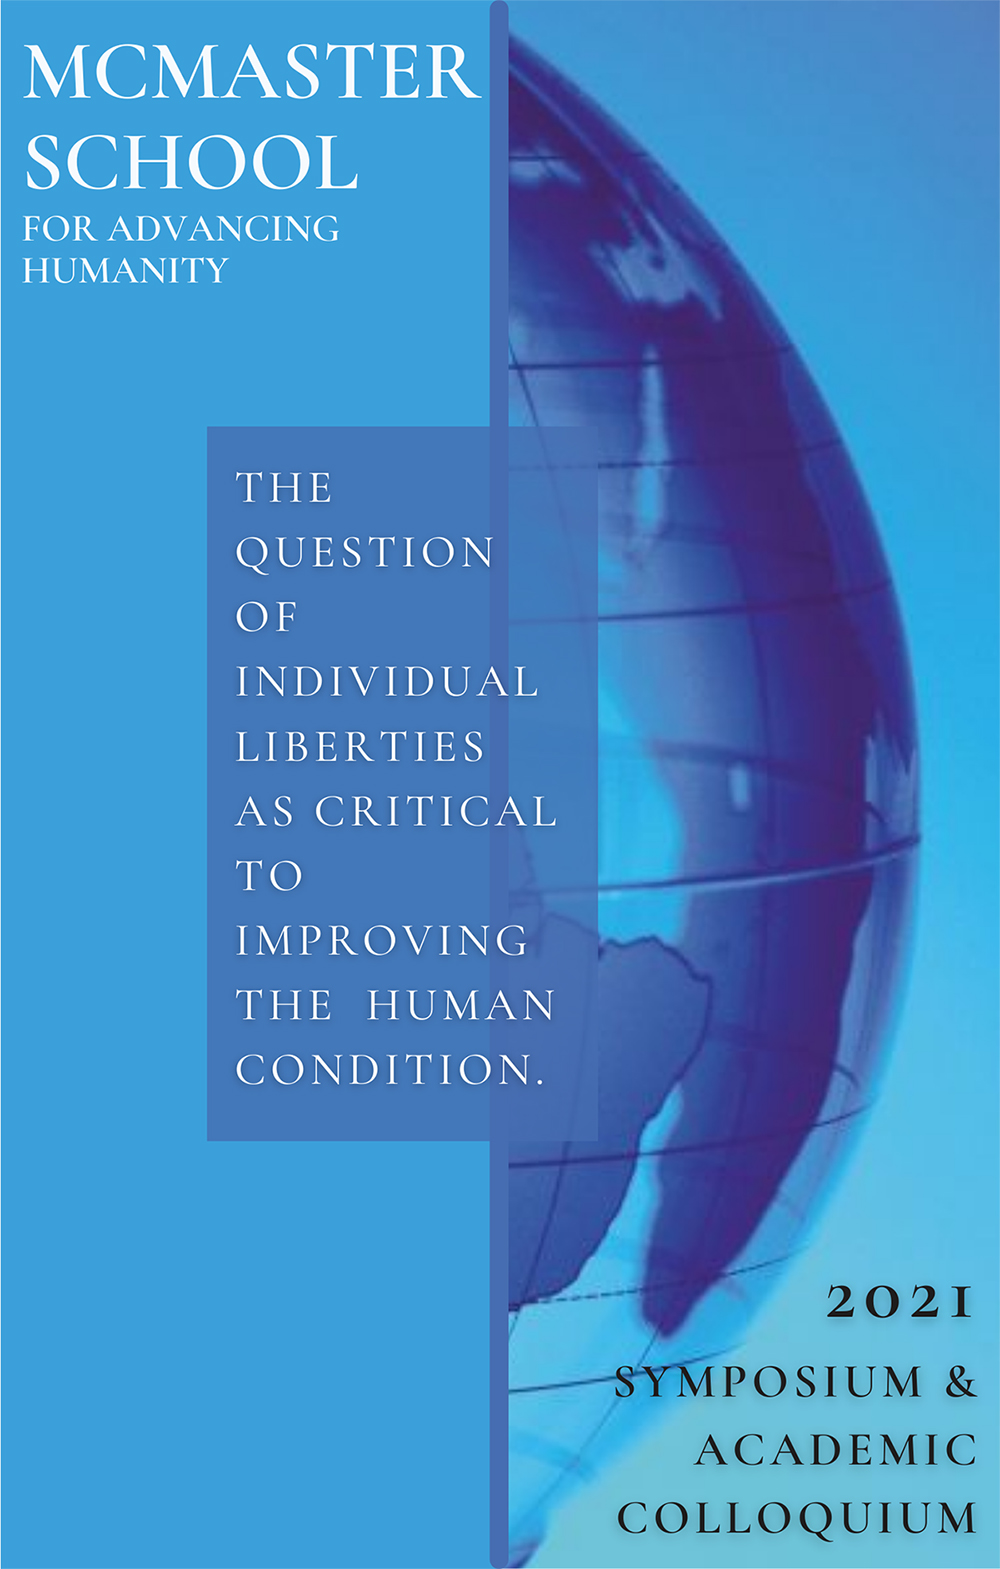 Blue image with a half globe and the text: McMaster School for Advancing Humanity: The question of individual liberties as critical to improving the human condition; 2021 symposium & academic colloquium